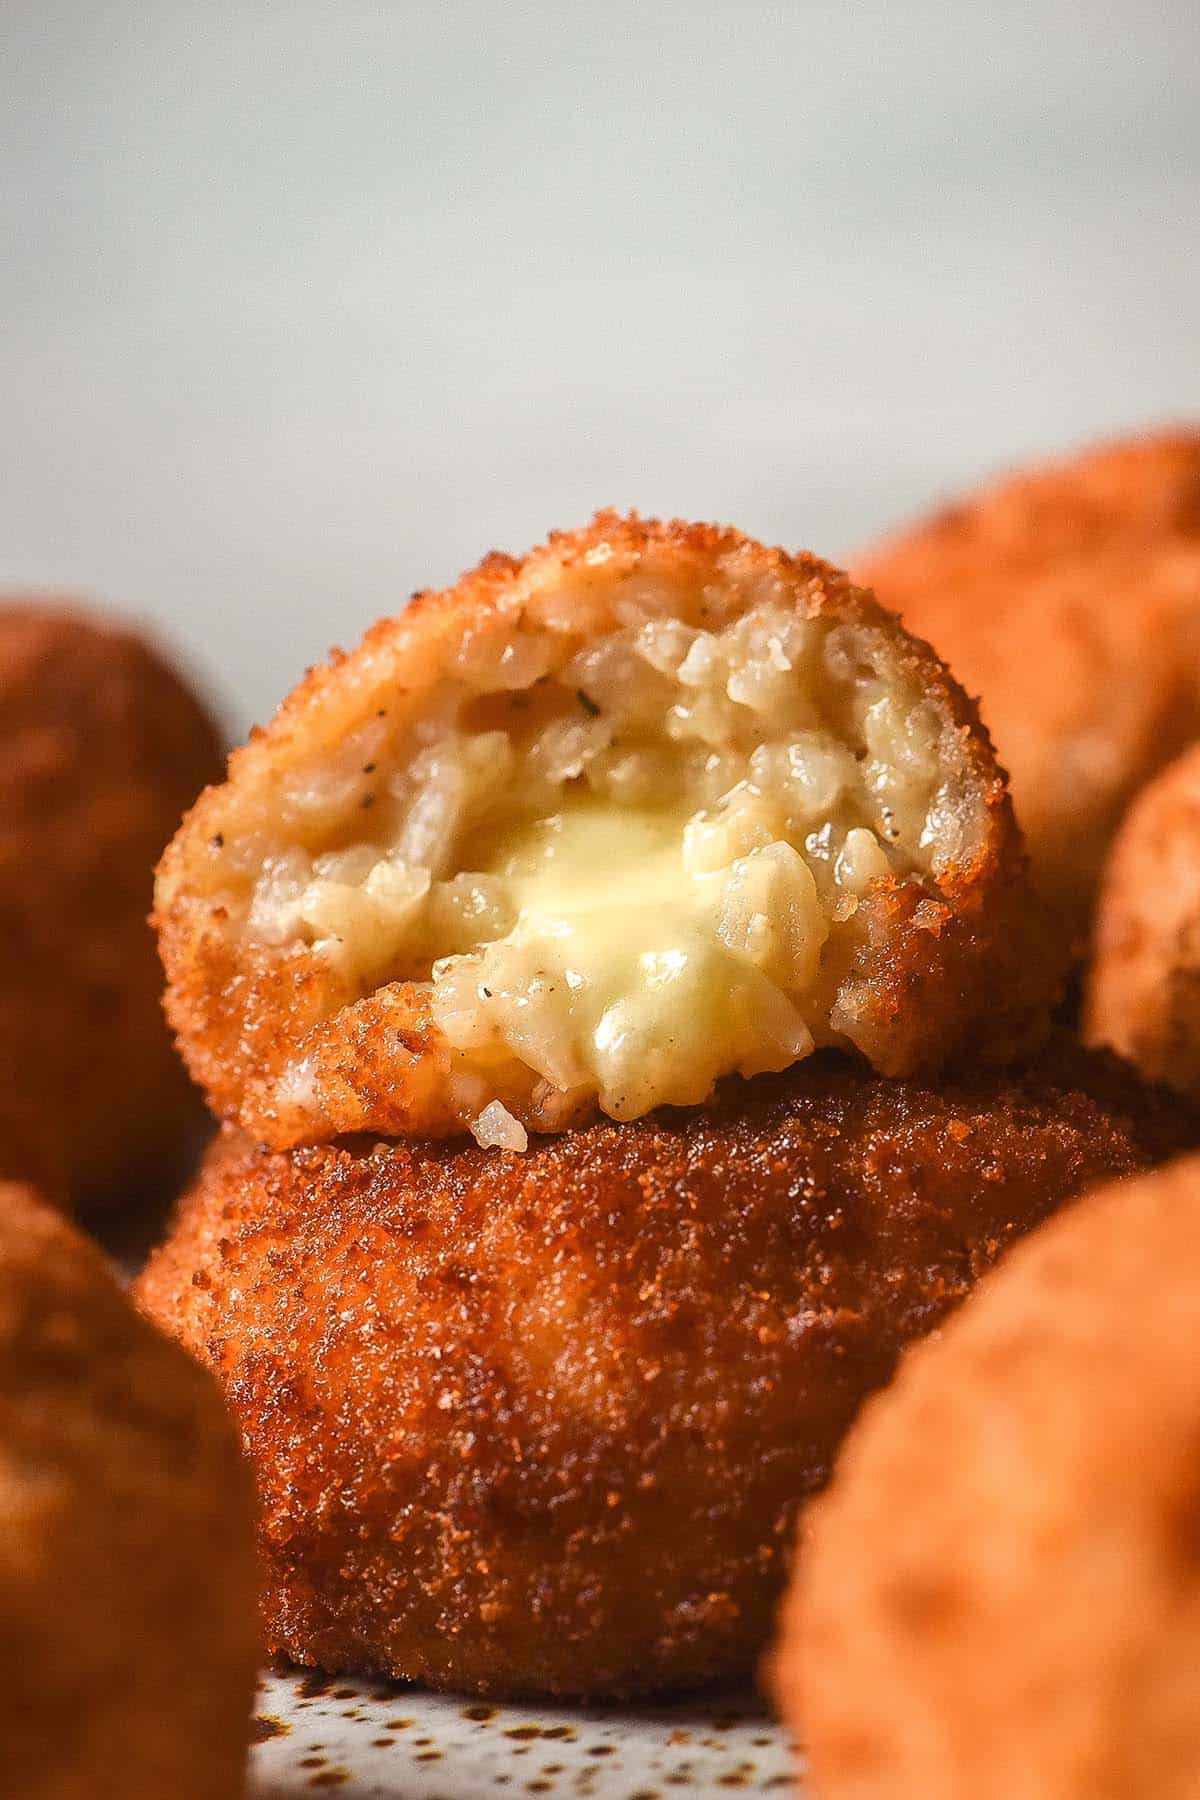 A side on image of gluten free arancini on a white plate against a white background. The arancini are stacked and the top arancino has been pulled apart, revealing the cheesy inner core.